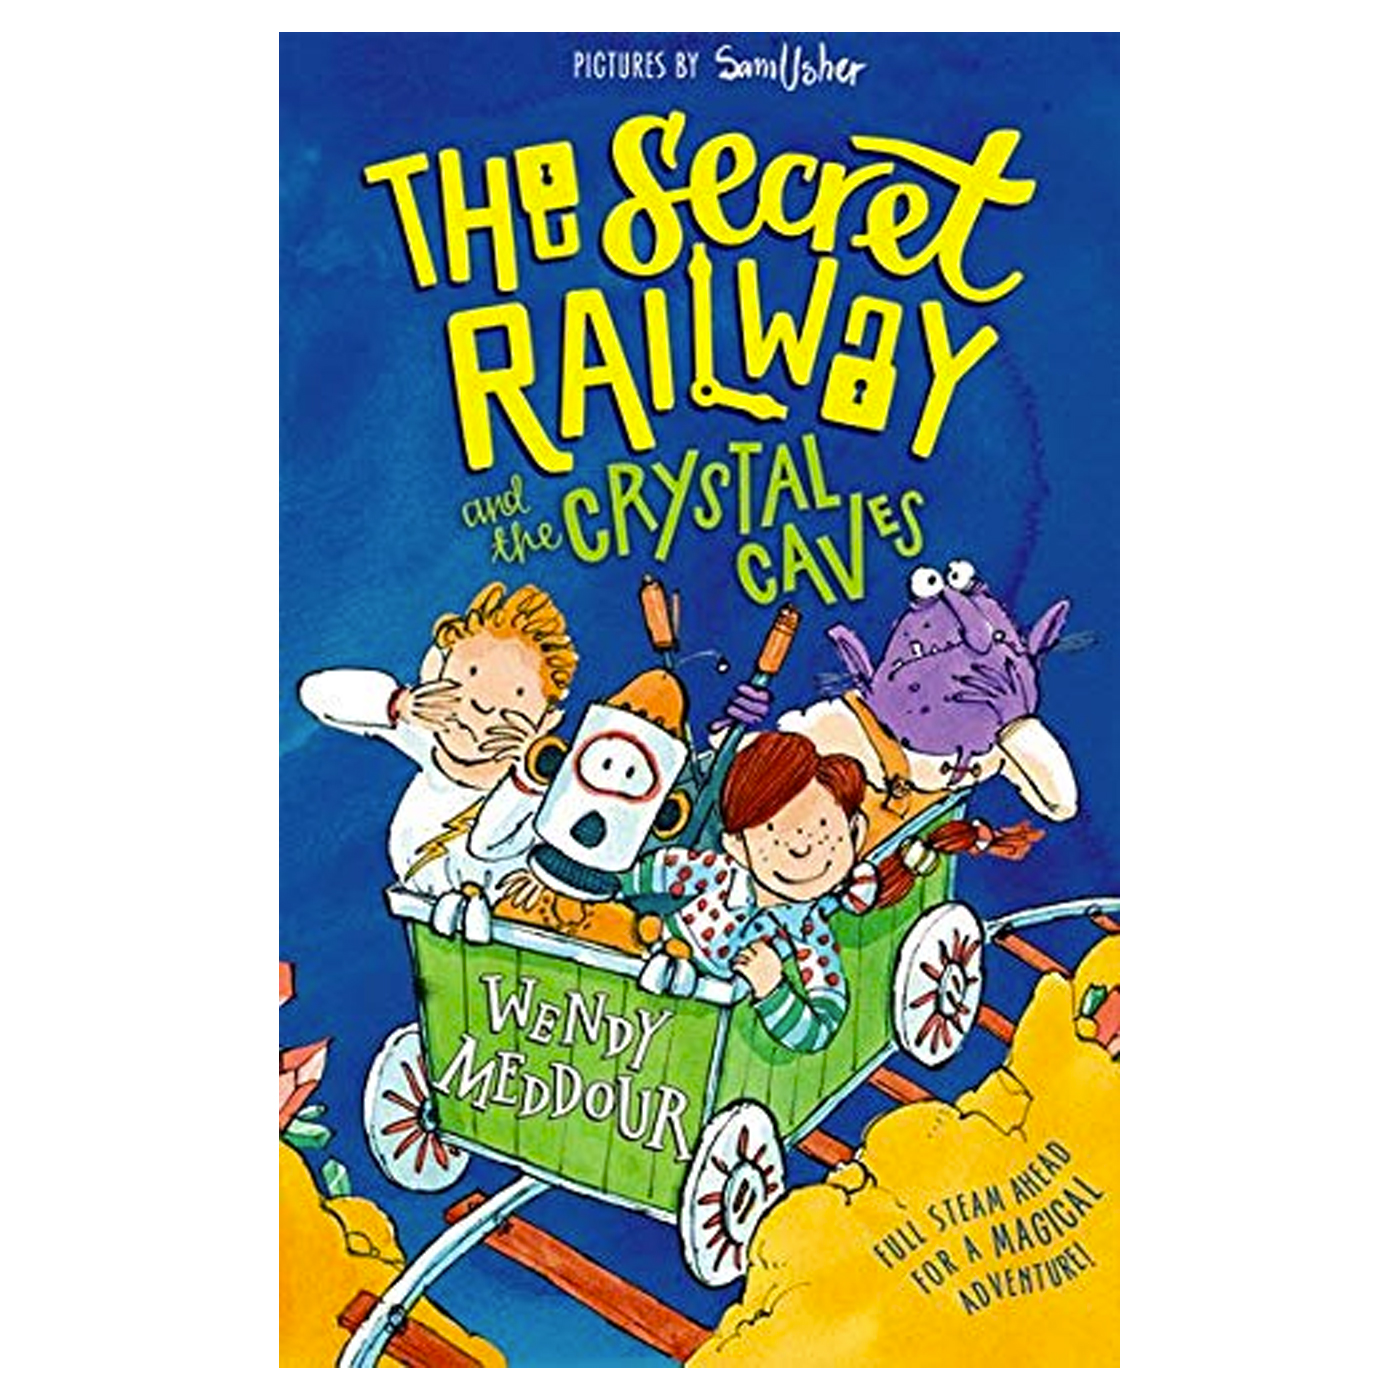  The Secret Railway And The Crystal Caves